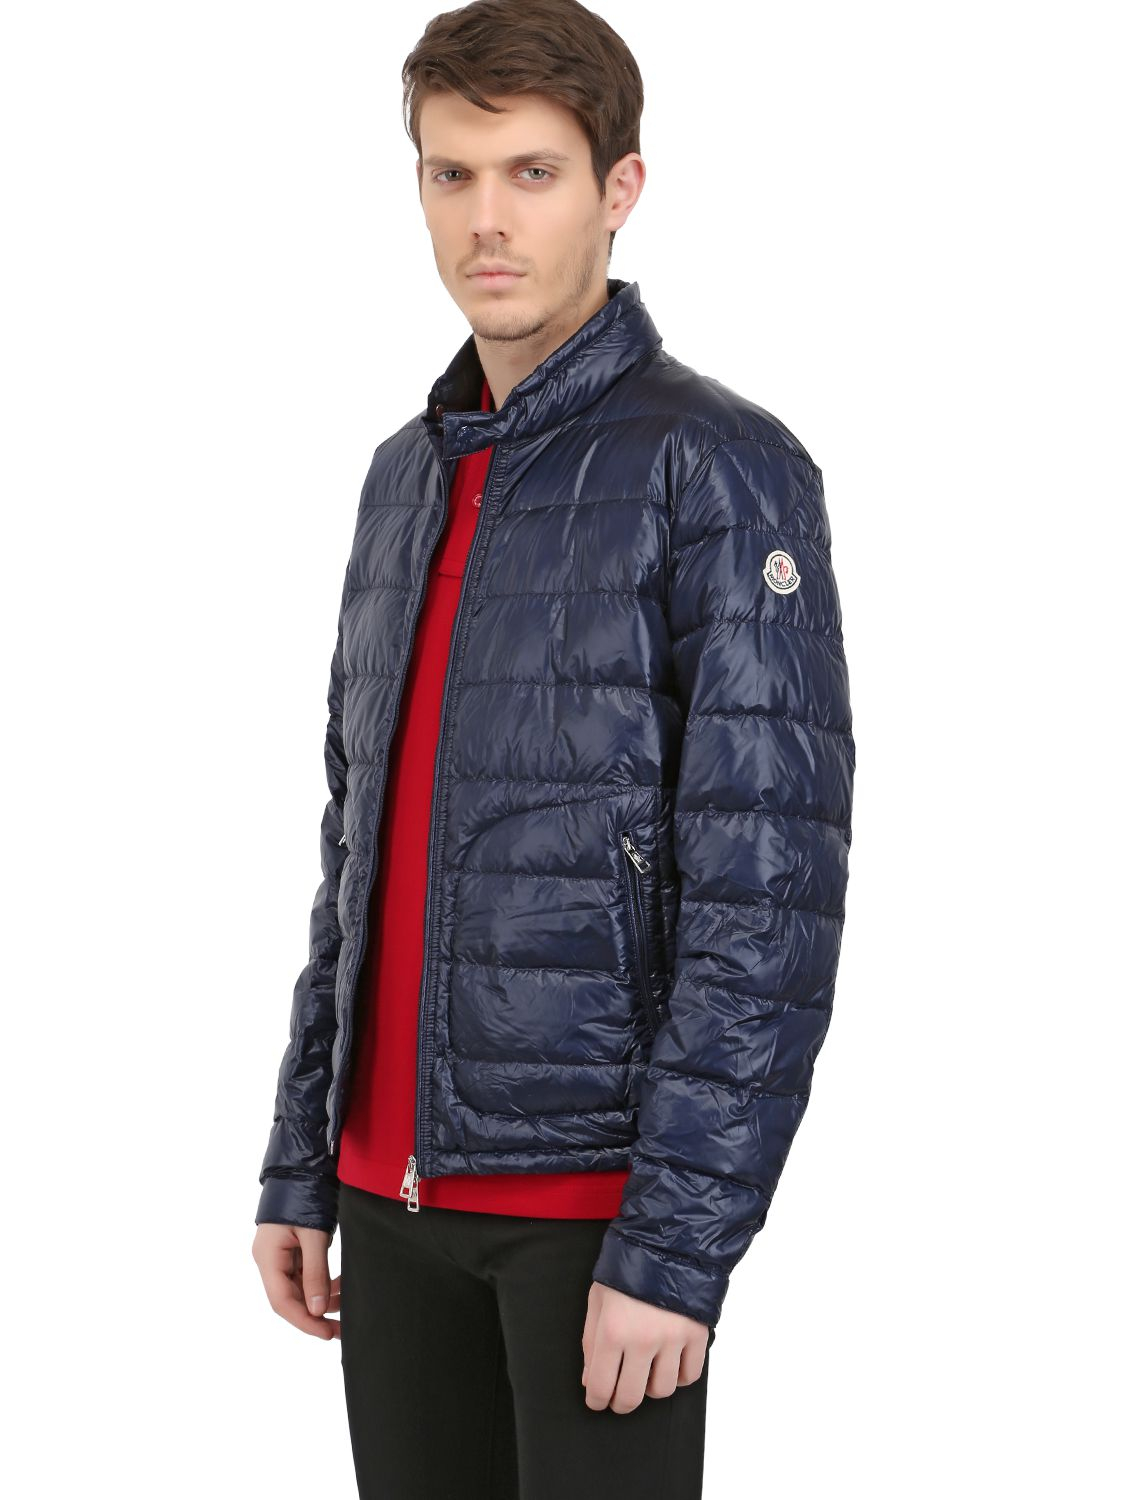 Lyst - Moncler Acorus Nylon Light Weight Down Jacket in Blue for Men